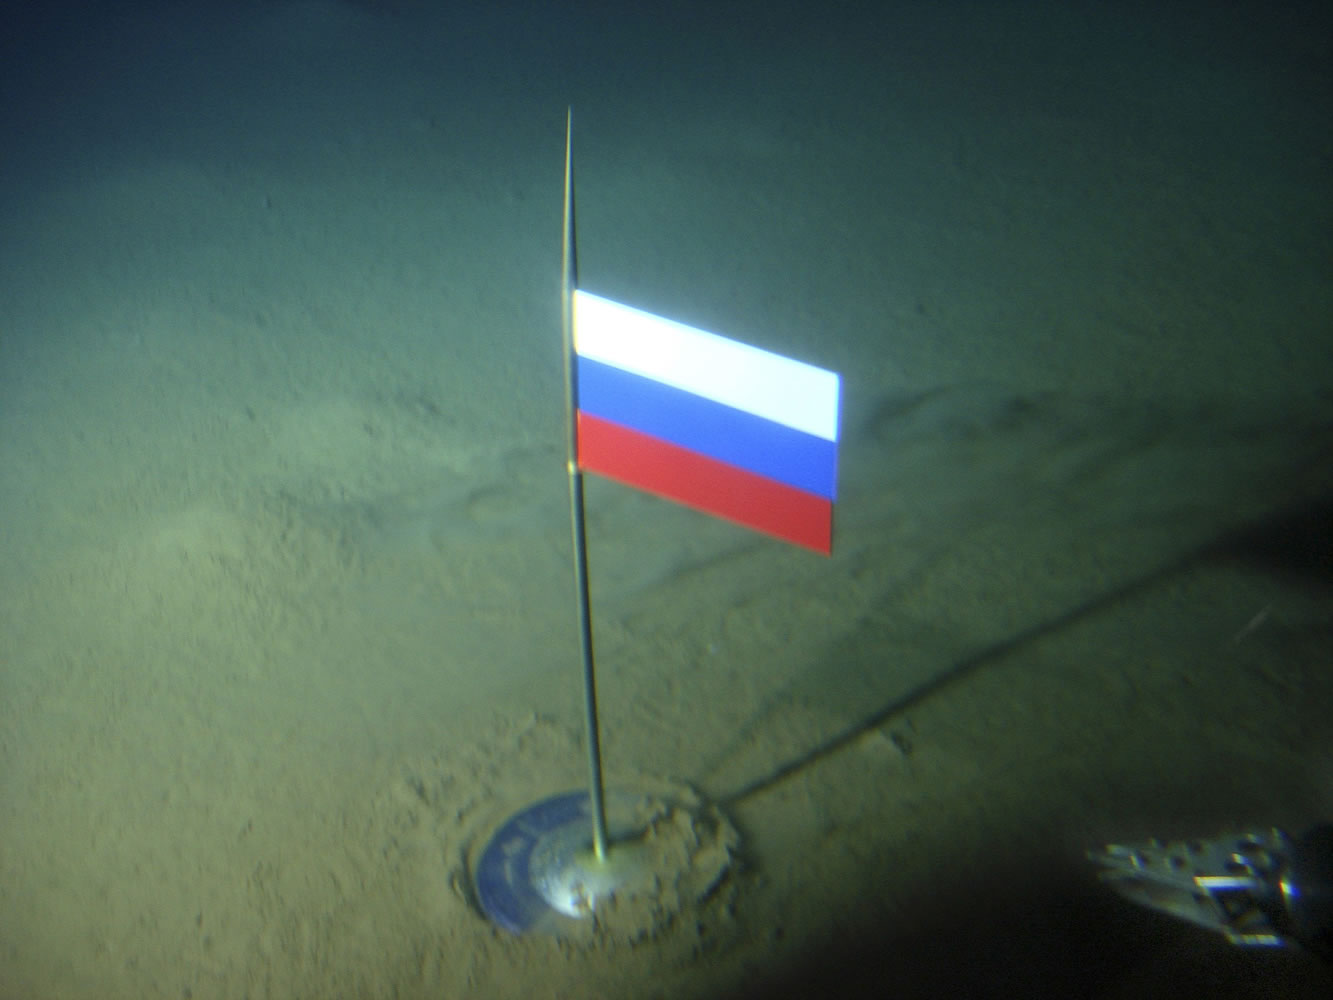 Association of Russian Polar Explorers
The Russian flag is seen seconds after it was planted in August 2007 by the Mir-1 mini submarine on the Arctic Ocean seabed under the North Pole. The Russian Foreign Ministry said Tuesday that Russia is claiming more than 463,000 square miles of Arctic sea shelf.